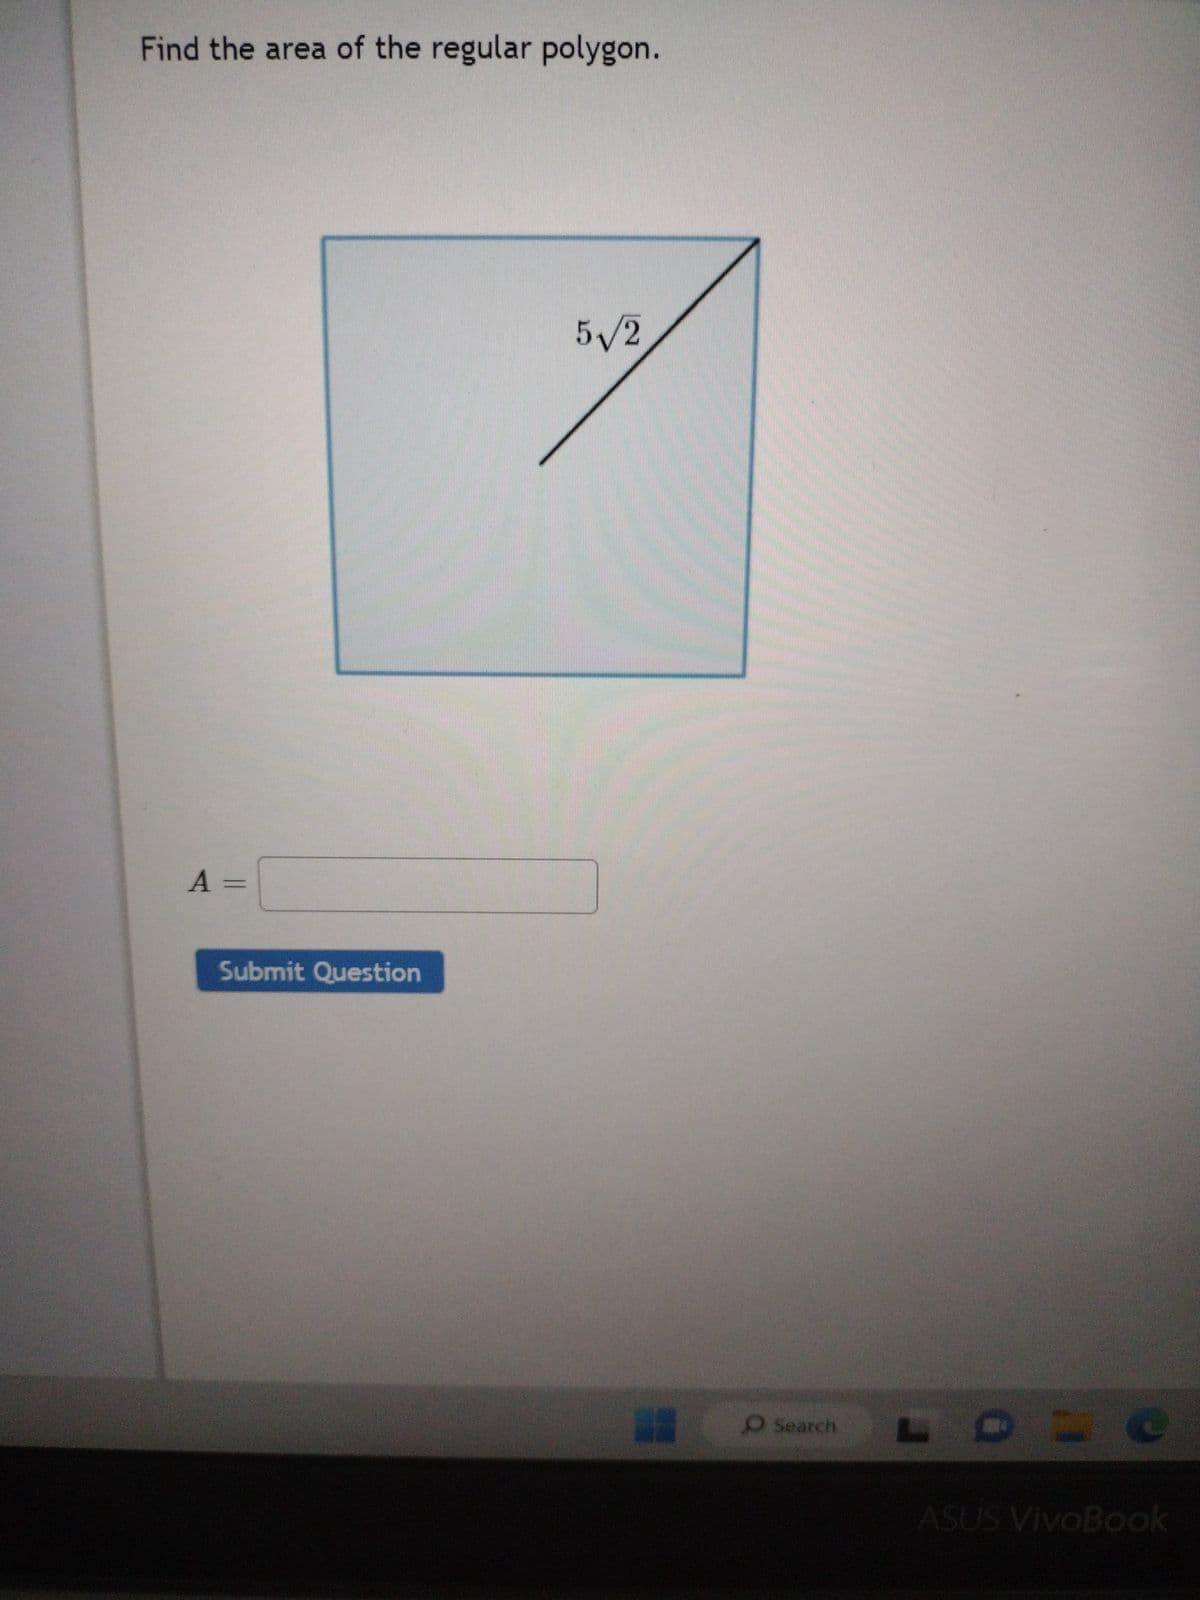 Find the area of the regular polygon.
A =
Submit Question
5√2
O Search
=
ASUS VivoBook